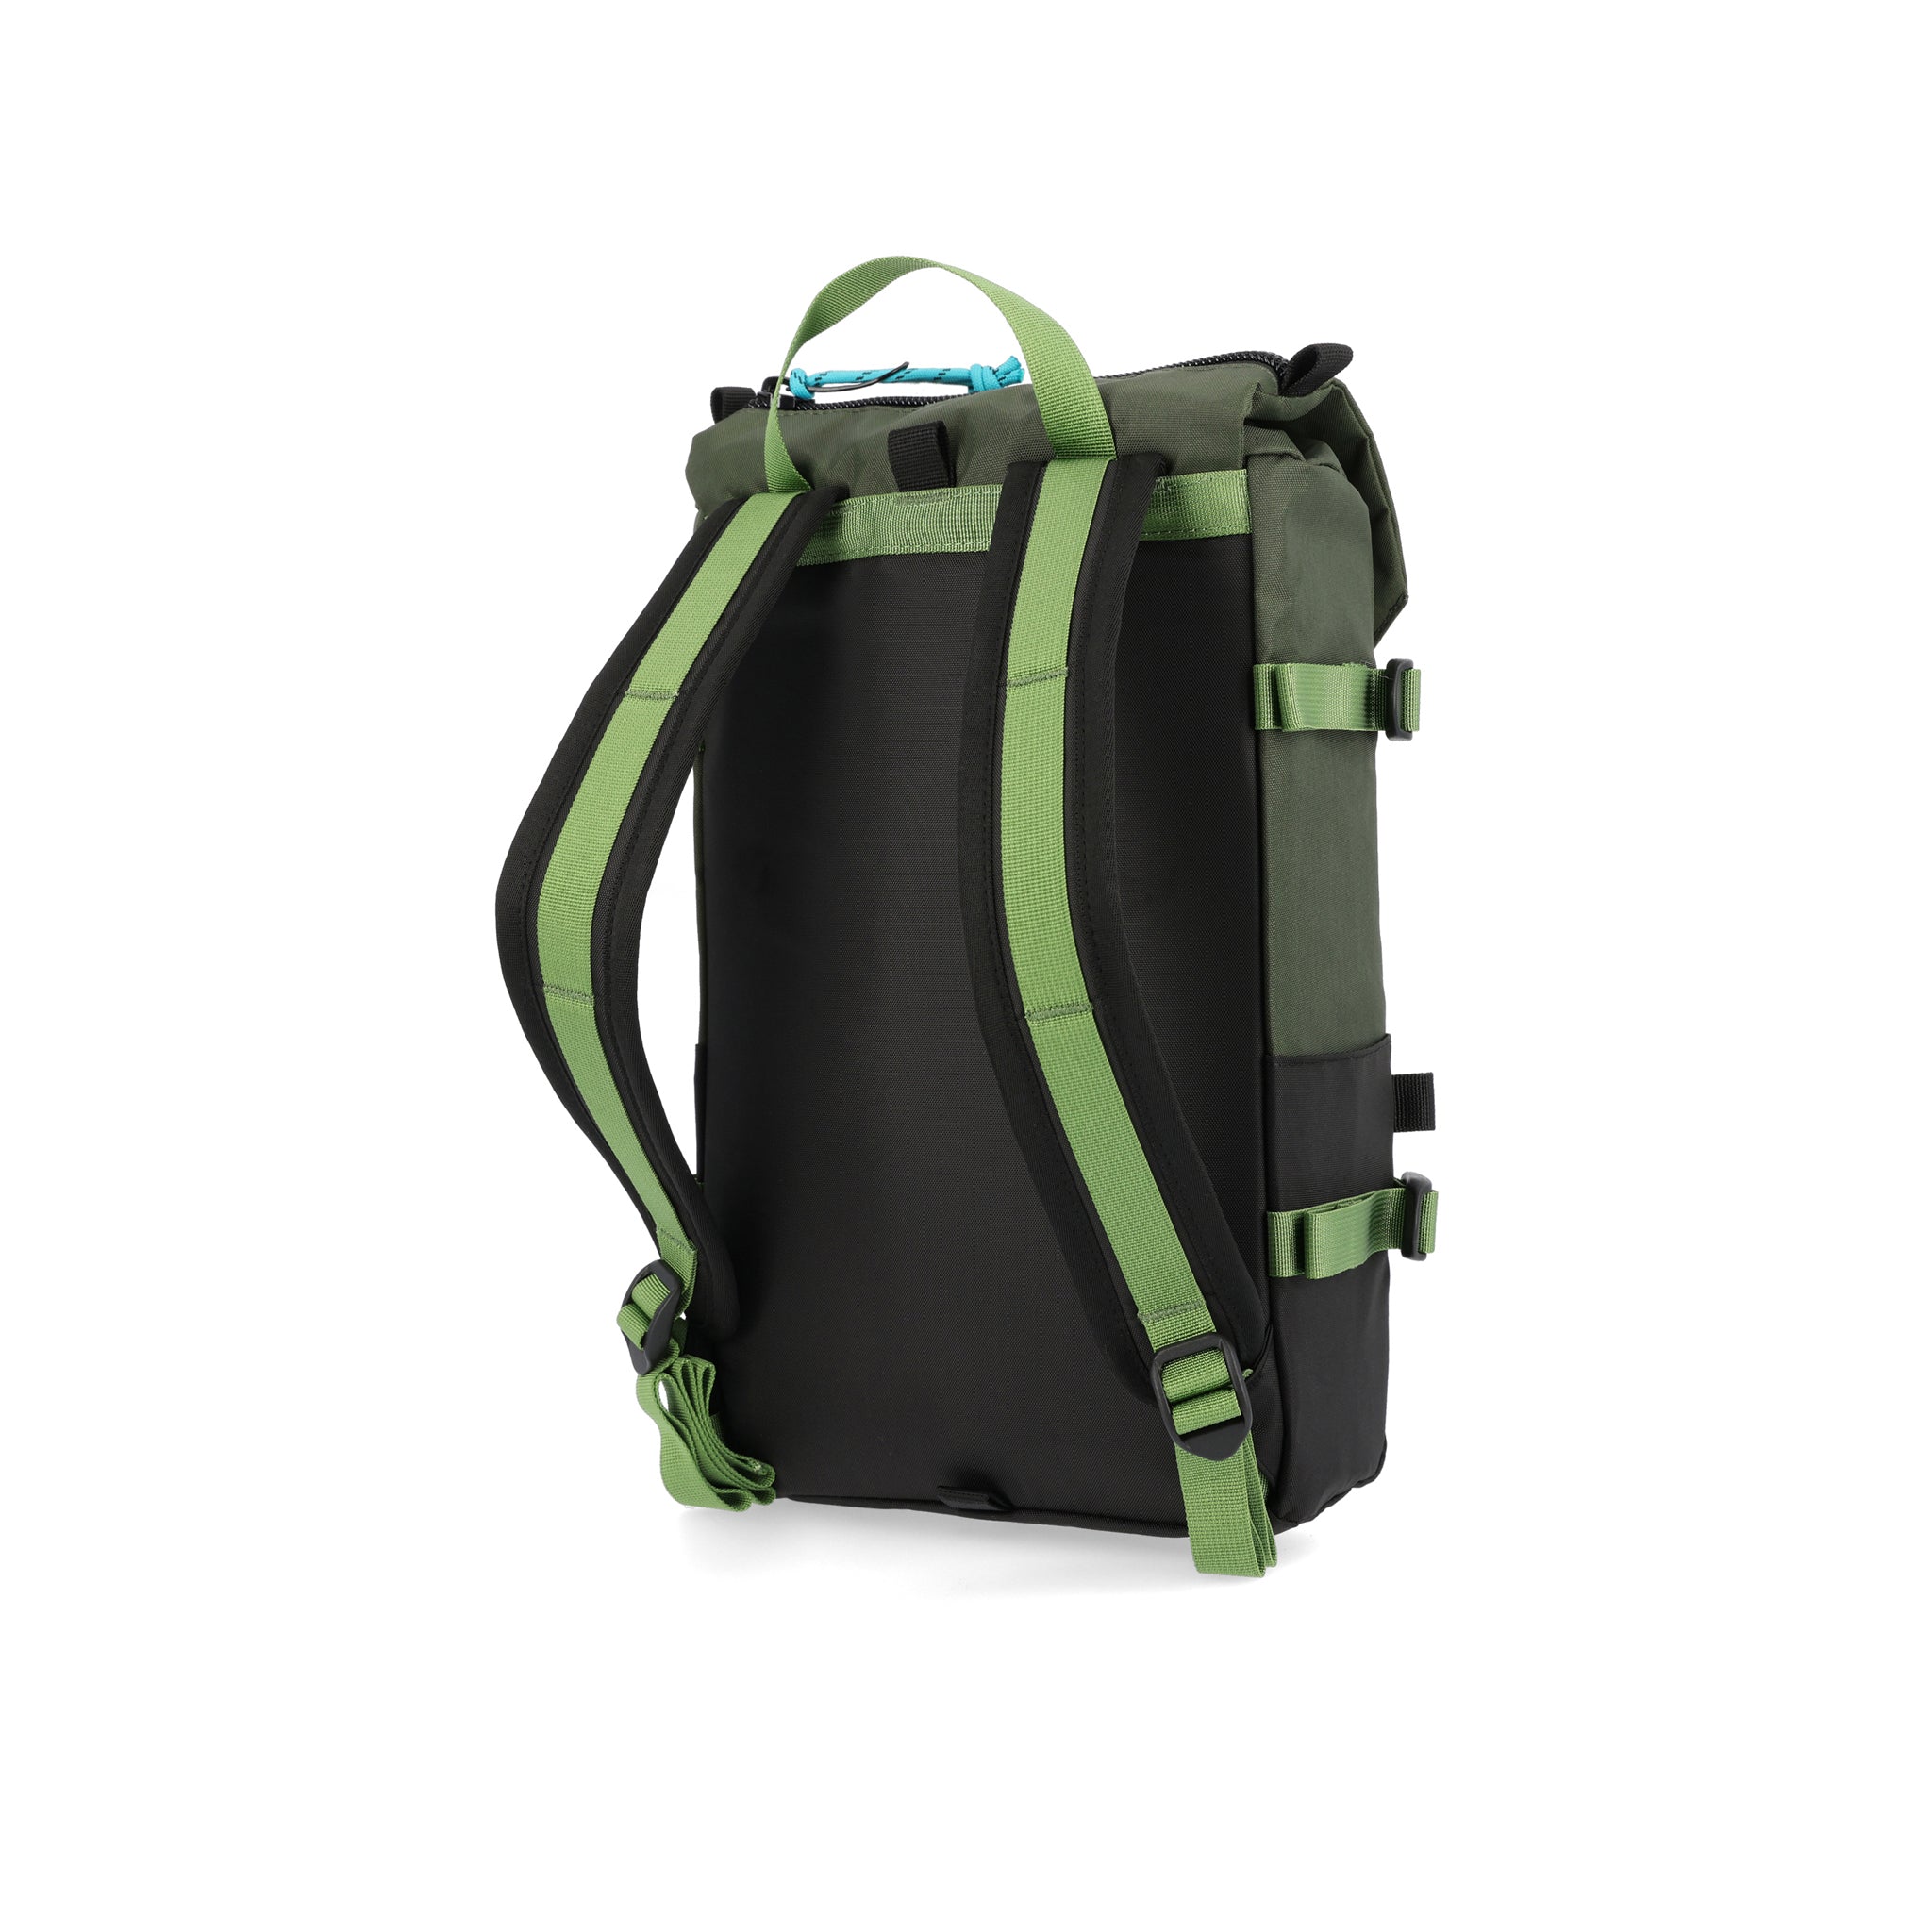 Back of Topo Designs Rover Pack Mini backpack in recycled "Olive / Black" green